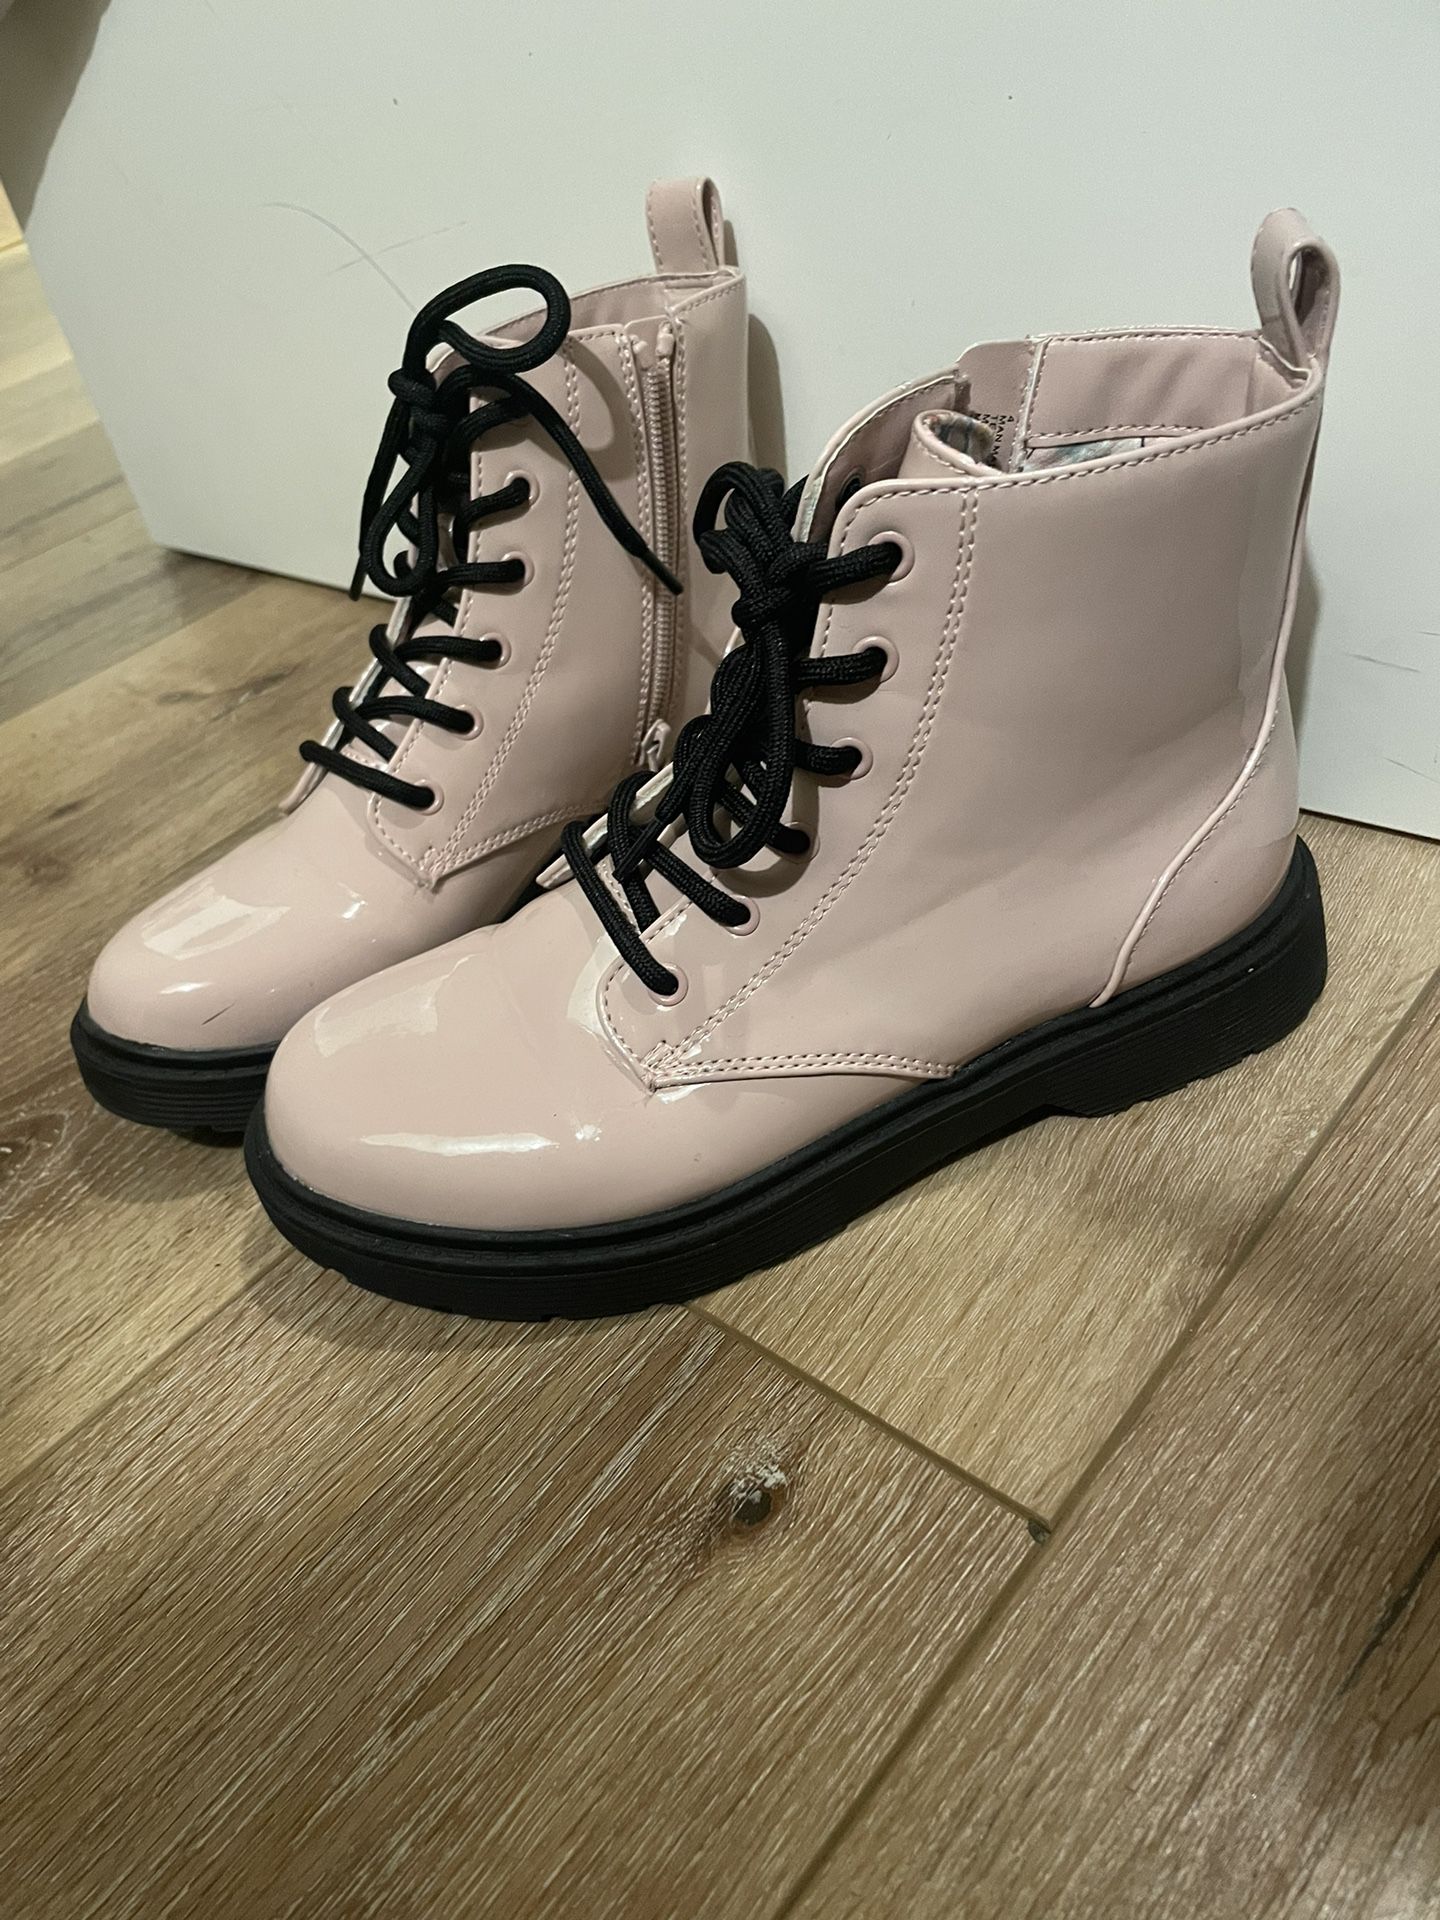 Pink Combat Boots Size 6.5 Or 4 Youth